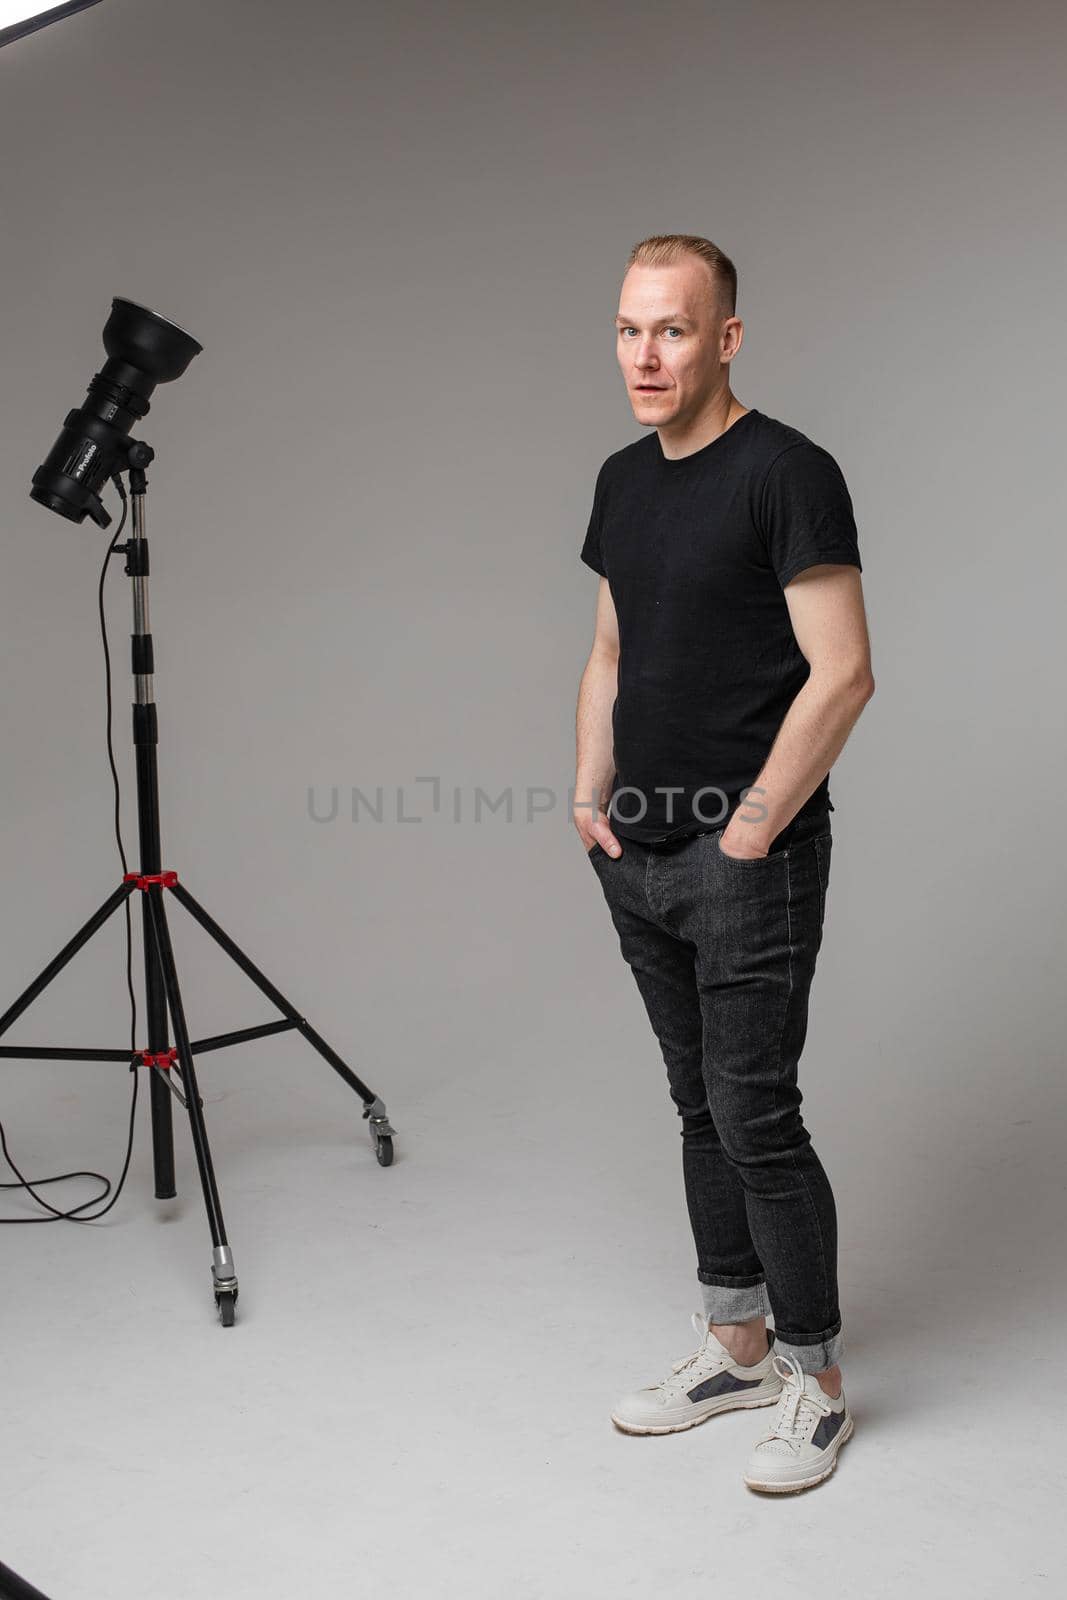 Staged photo of man in black clothes posing at the studio by StudioLucky